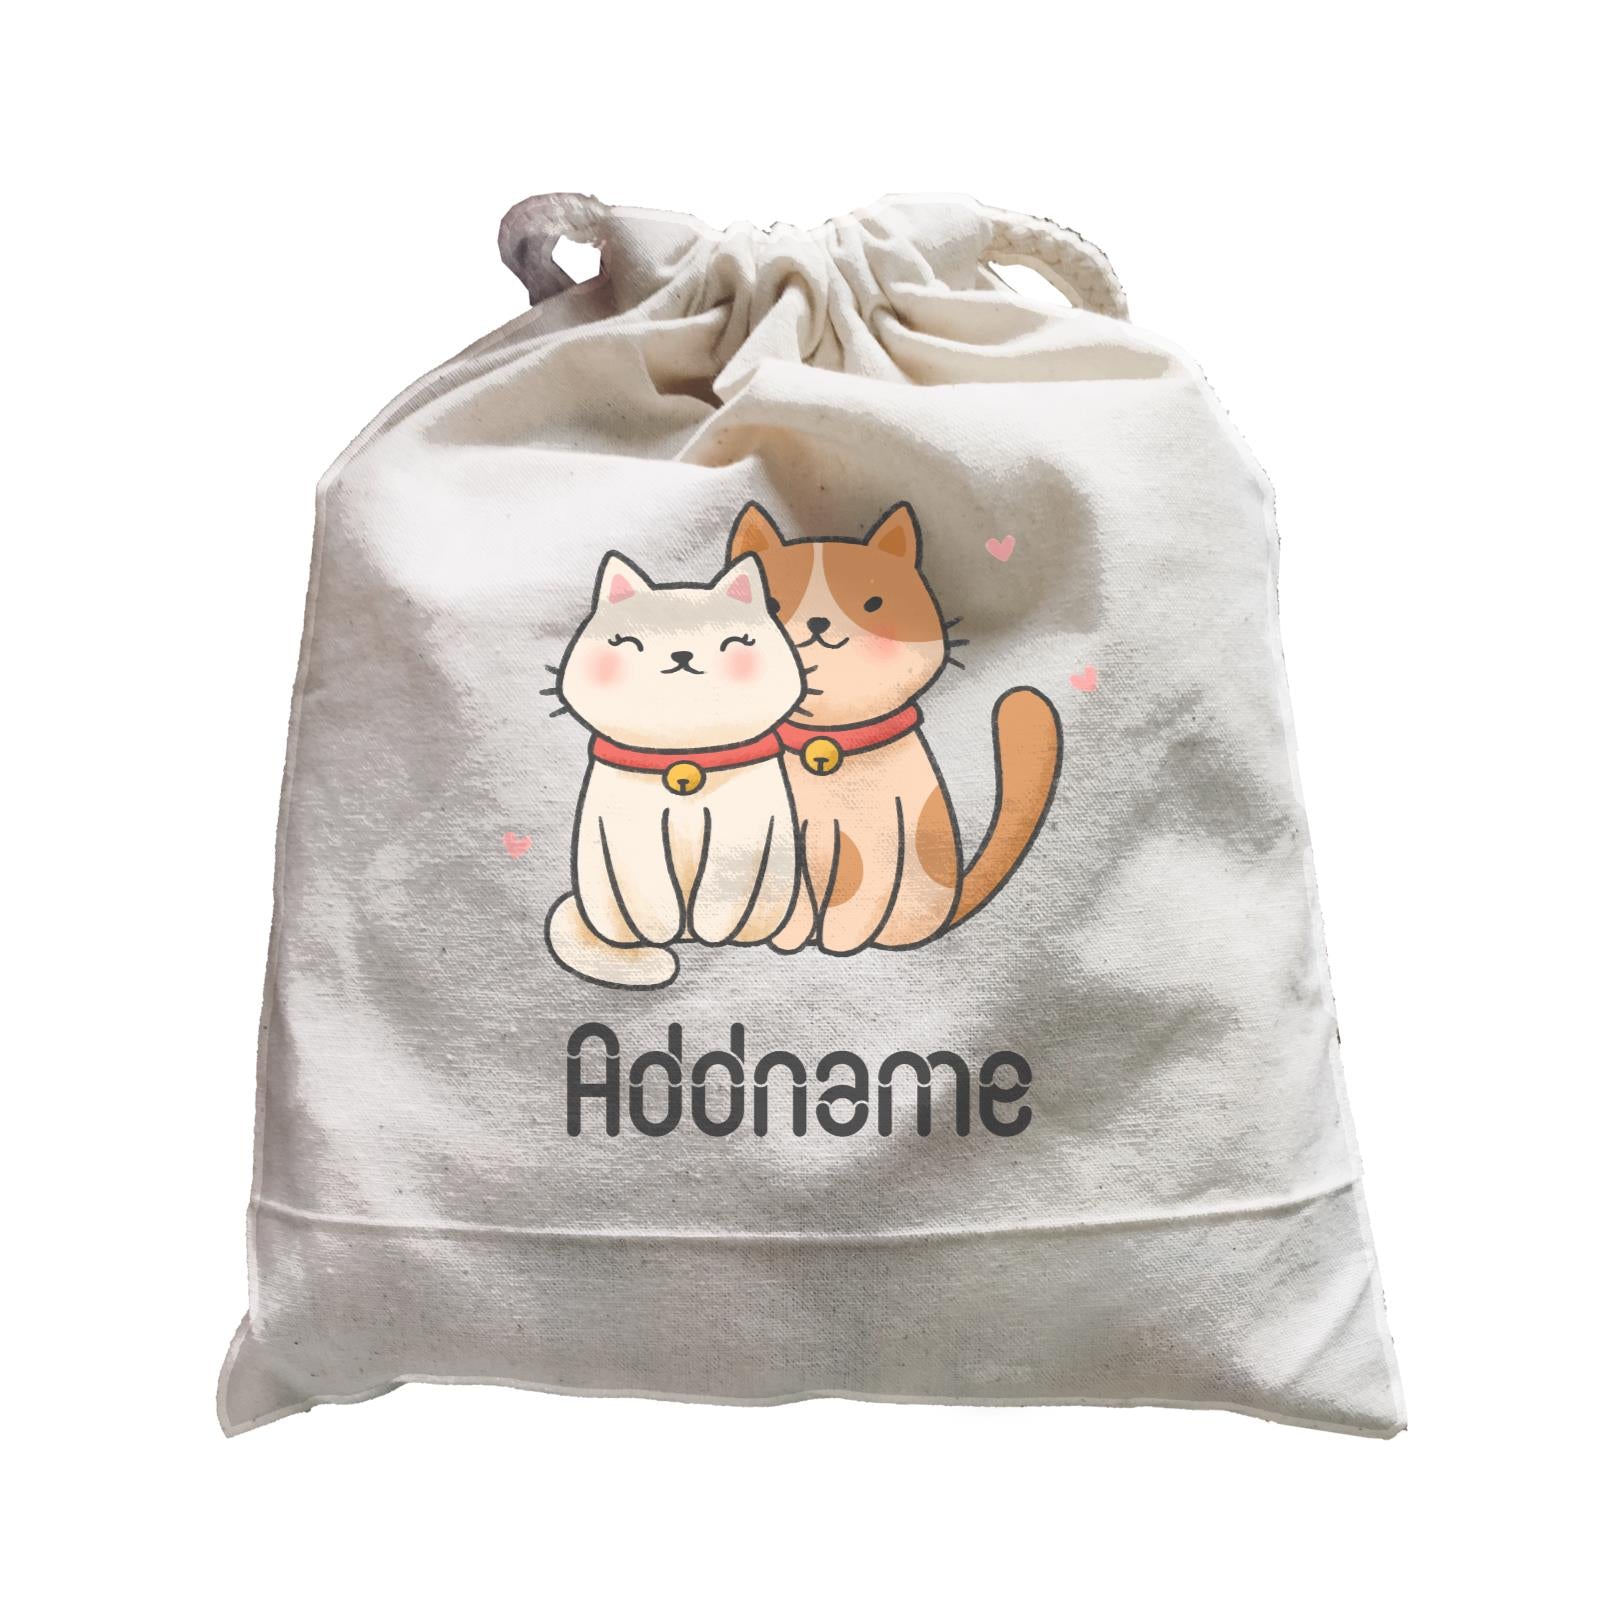 Cute Hand Drawn Style Couple Cat Addname Satchel